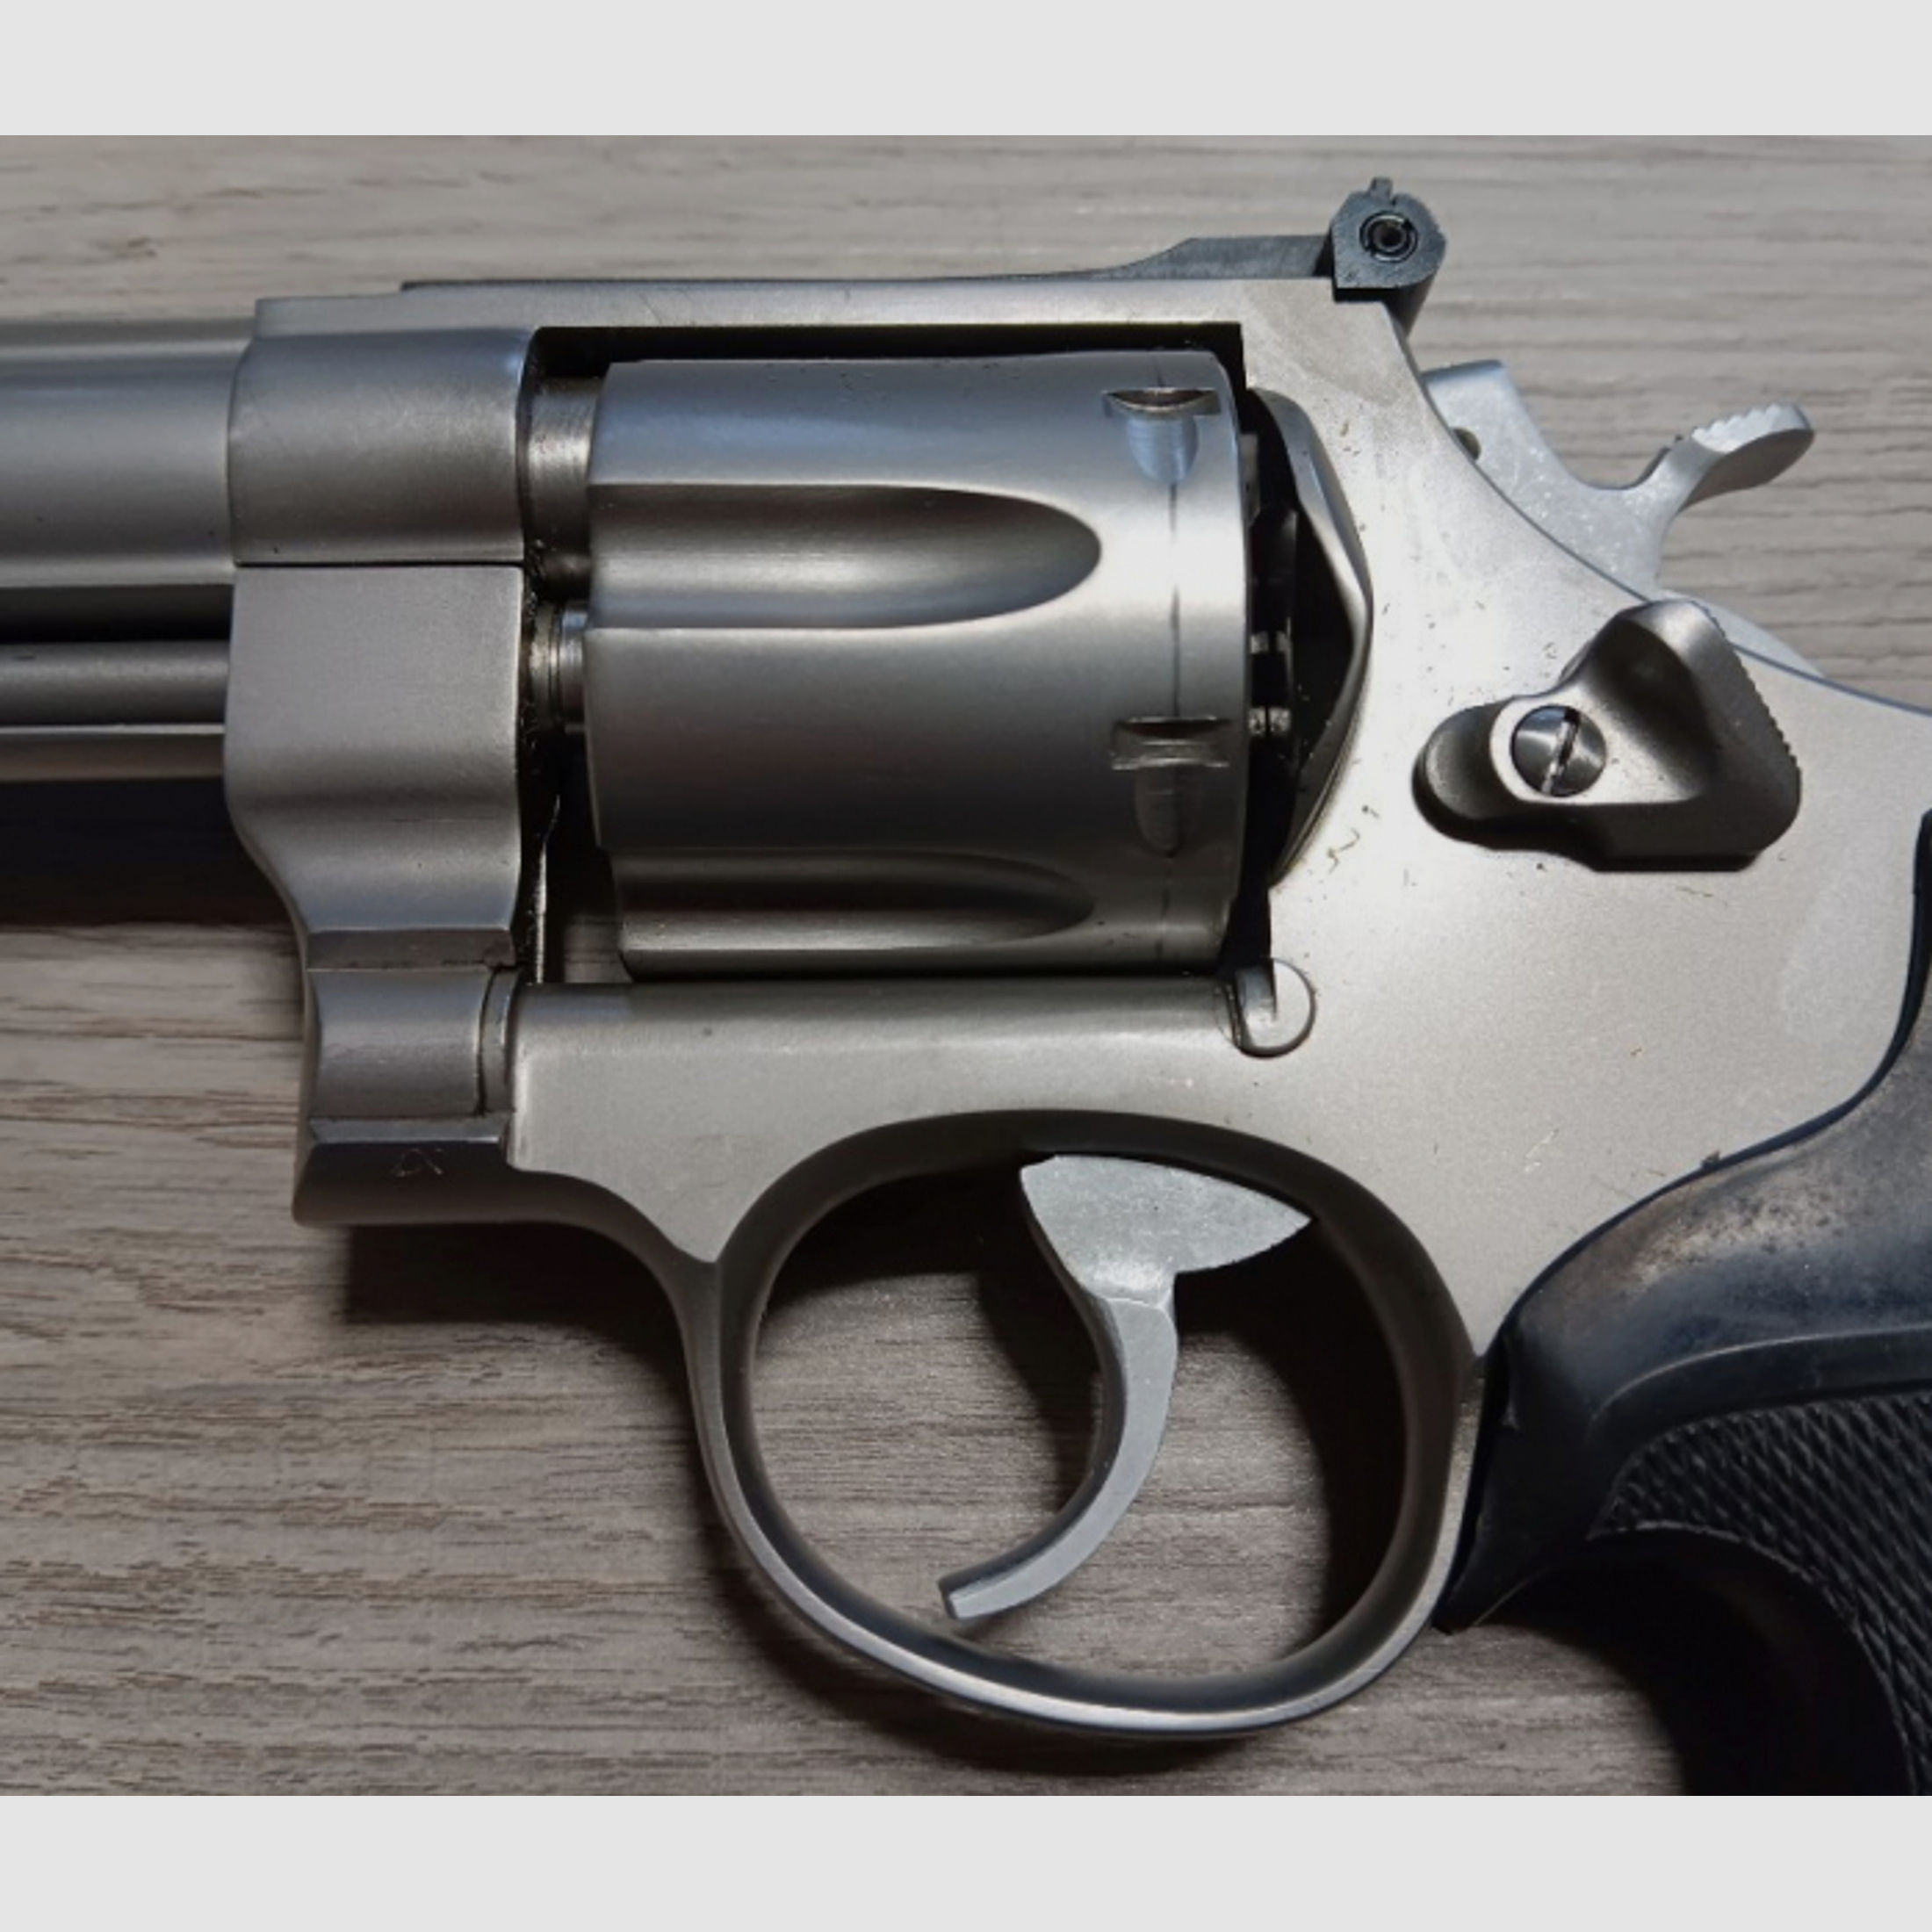 Smith and Wesson 625-2 Baujahr 1988